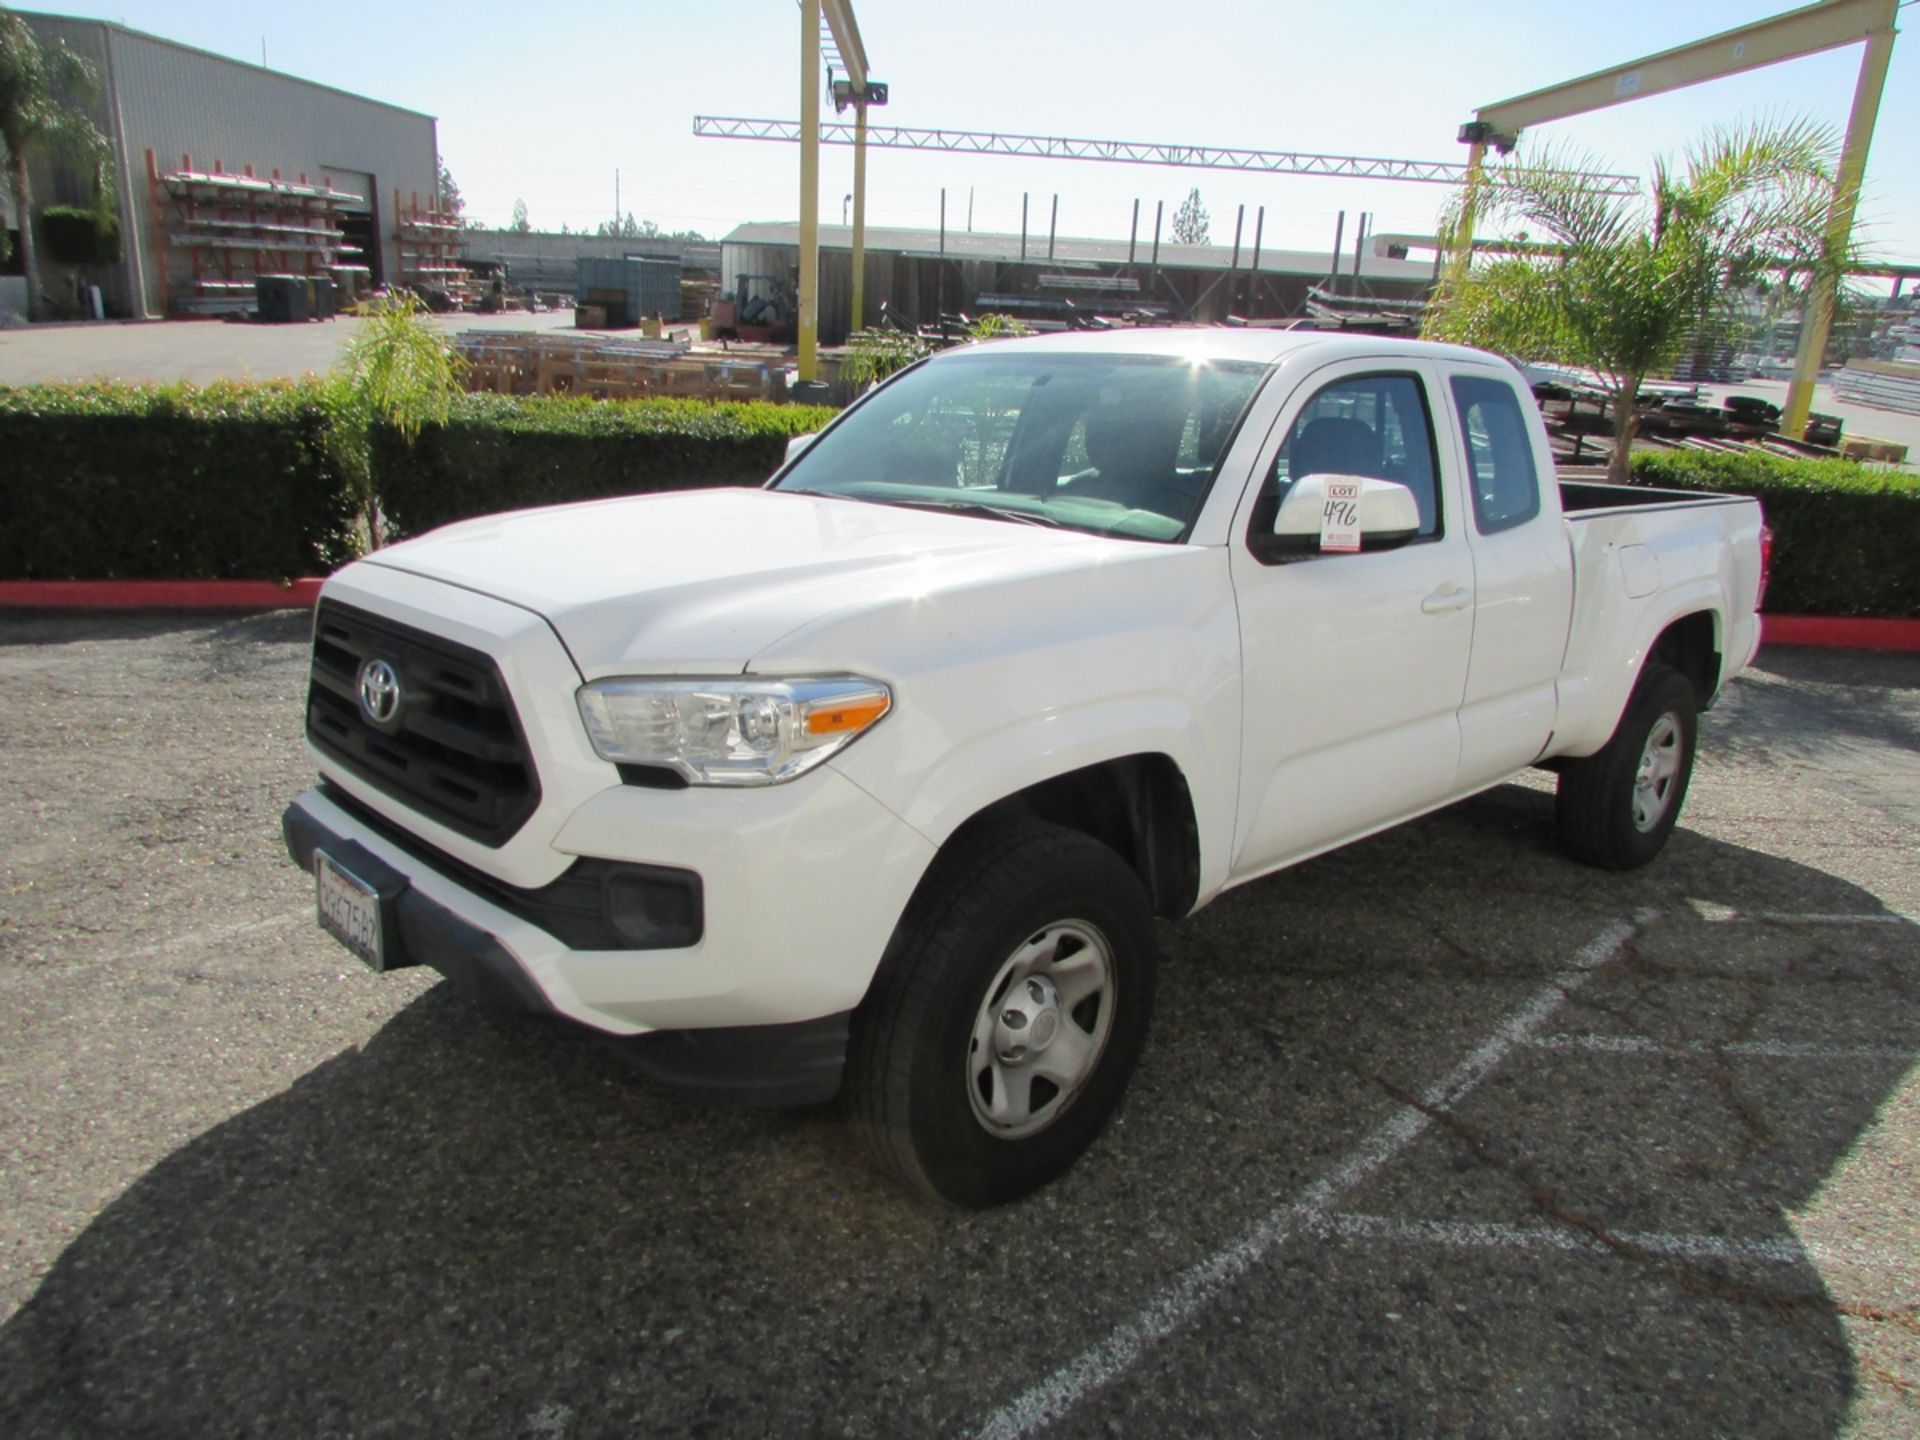 2016 TOYOTA TACOMA 2X4 EXTENDED CAB PICKUP TRUCK, 6' BED, 2.7L INLINE 4 CYLINDER ENGINE, AUTOMATIC